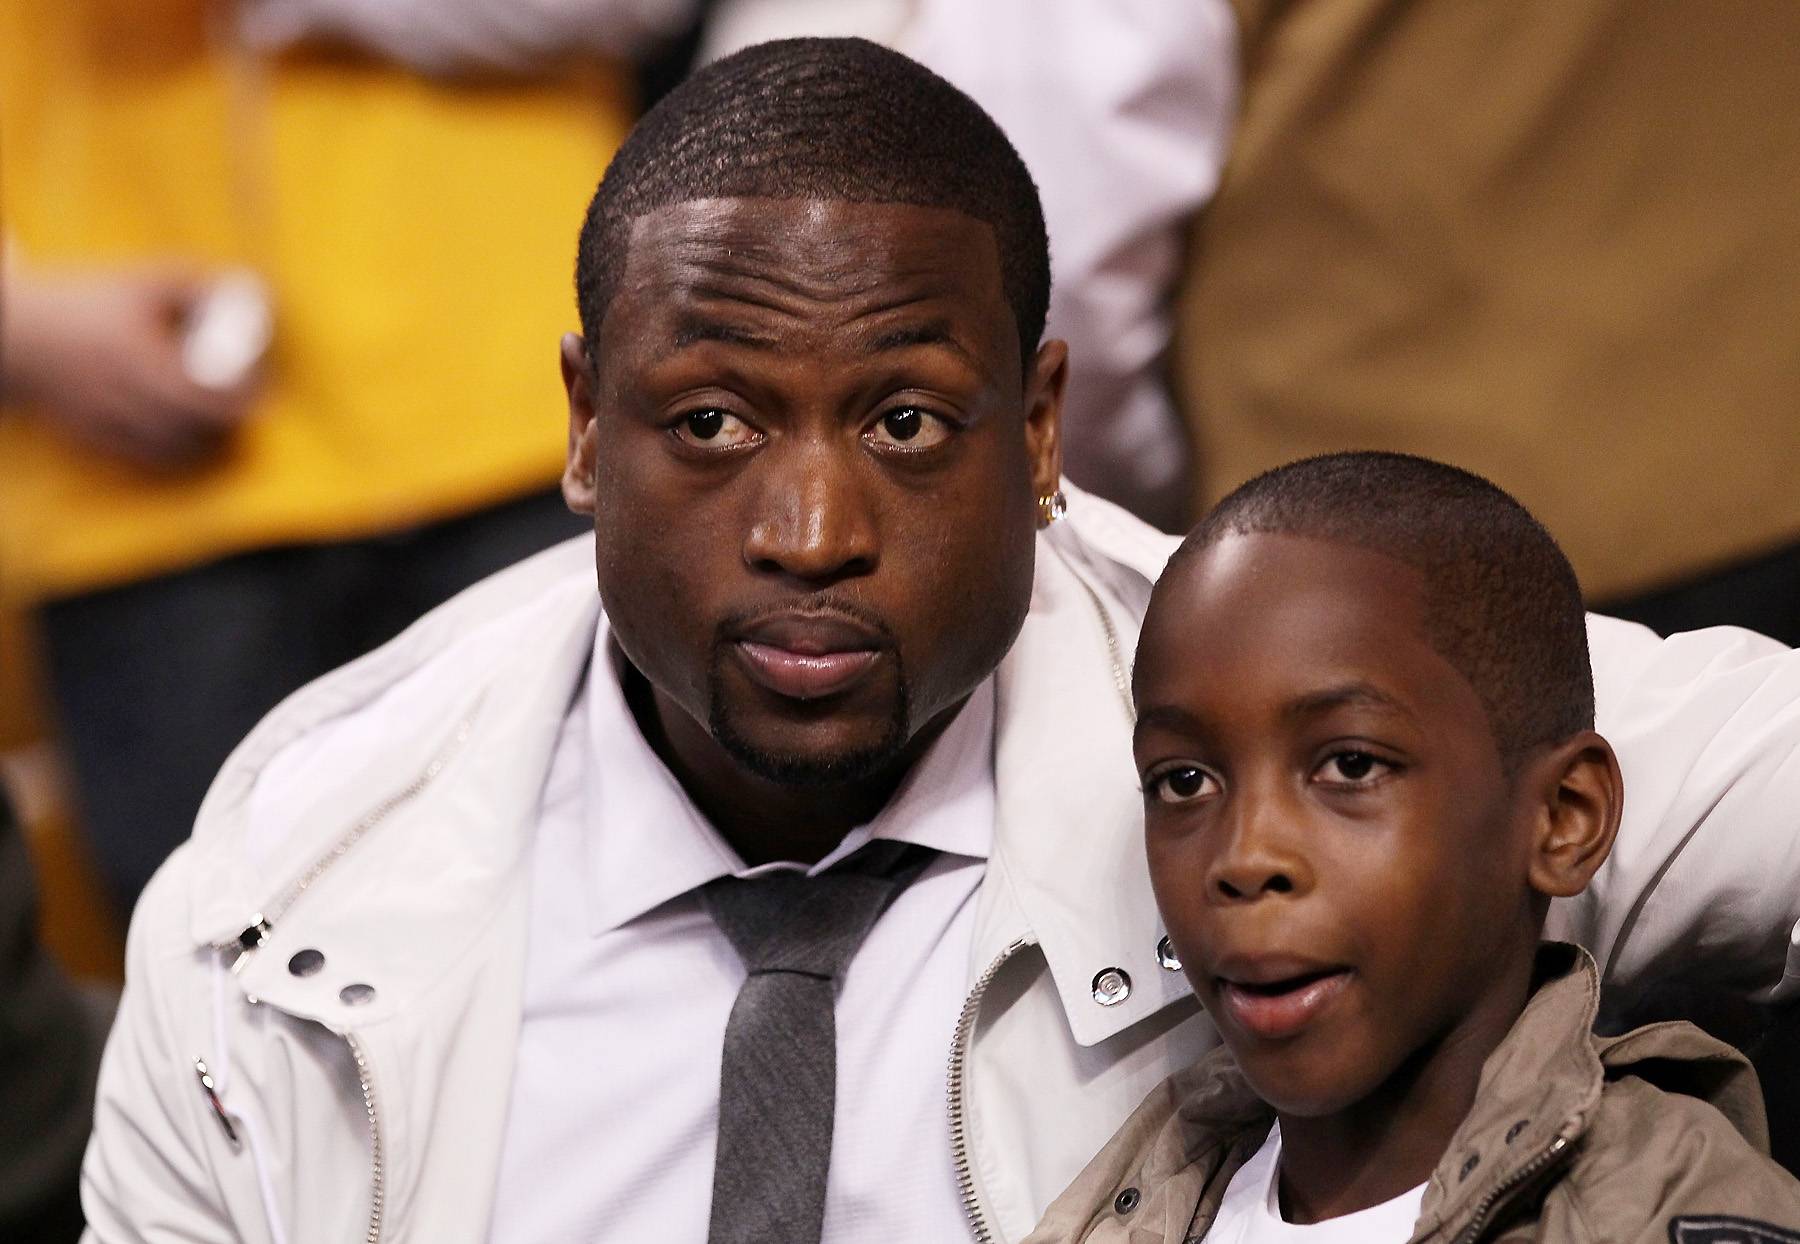 Dwyane Wade - Miami Heat’s Dwyane Wade and son Zaire in 2010.&nbsp;(Photo: Elsa/Getty Images)